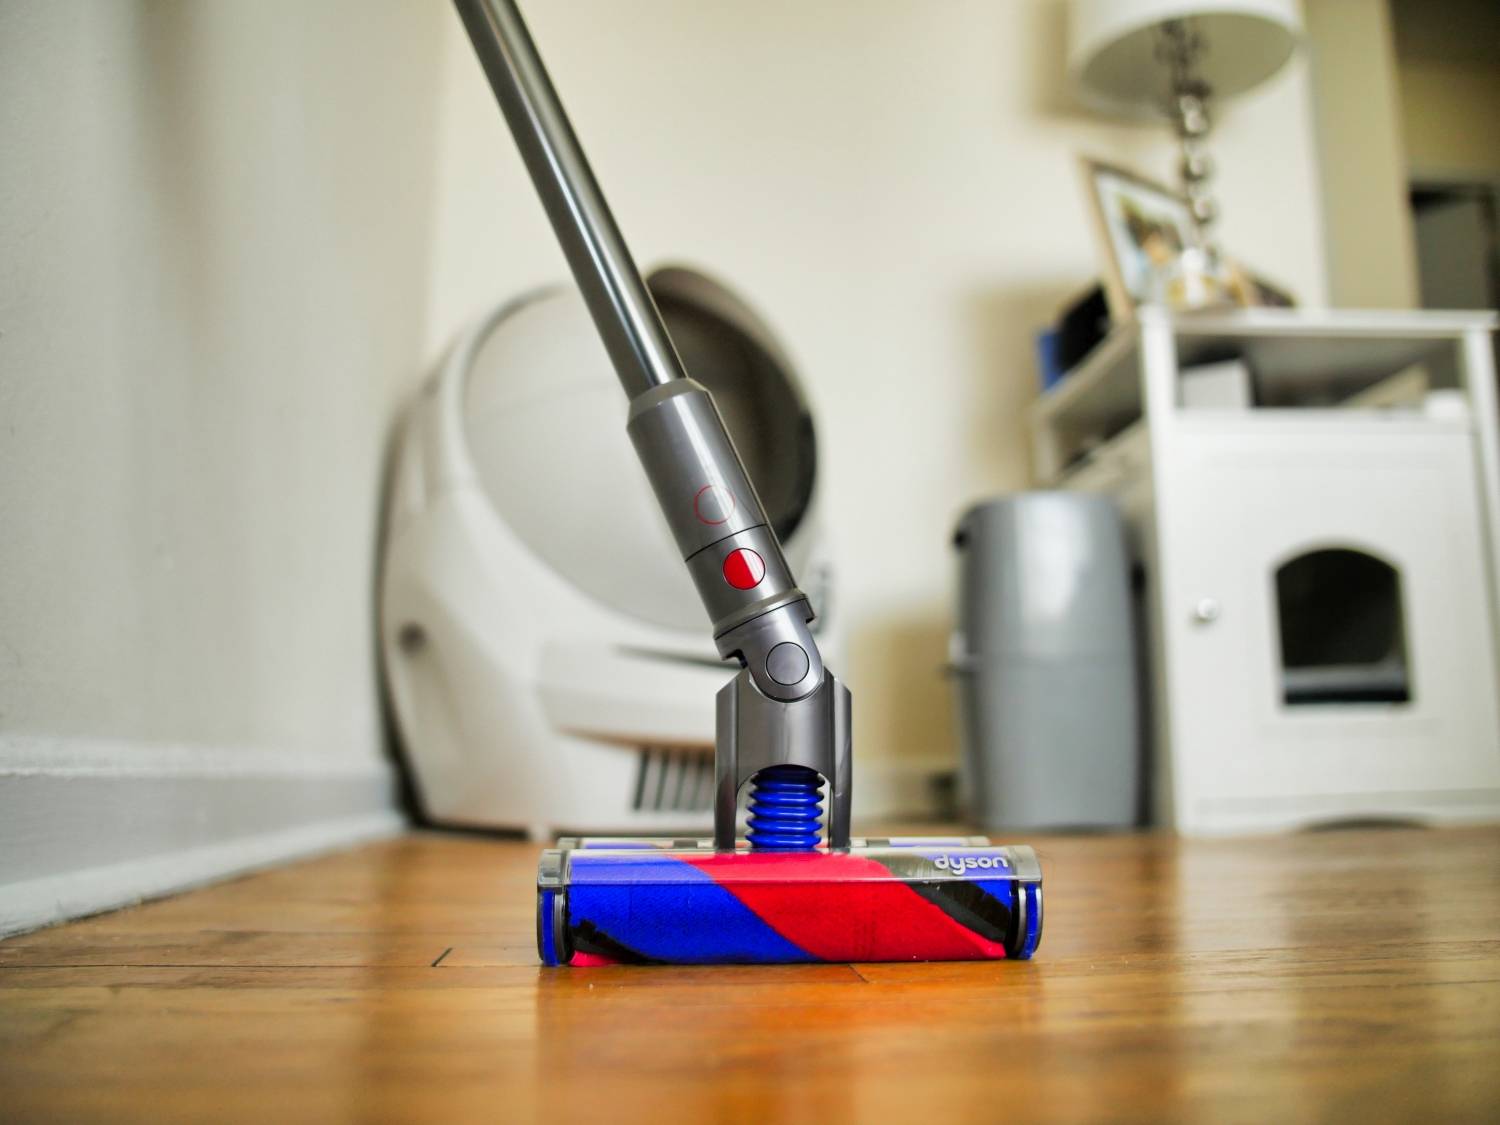 Reviews for Dyson Dyson V10 Animal Cordless Stick Vacuum Cleaner